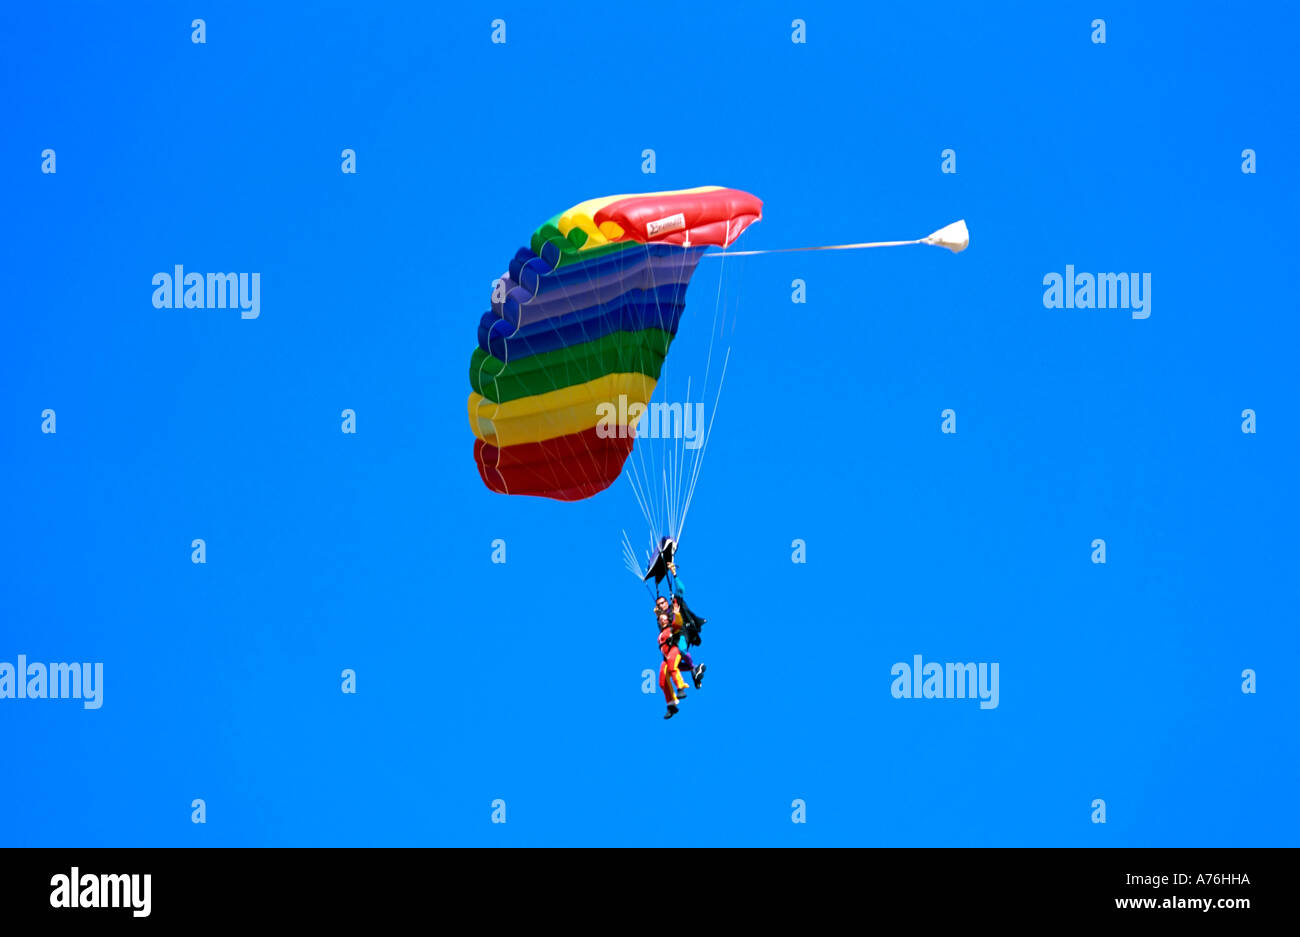 Buddy parachutists floating down in the sky with a rainbow coloured parachute and a blue sky background. Stock Photo